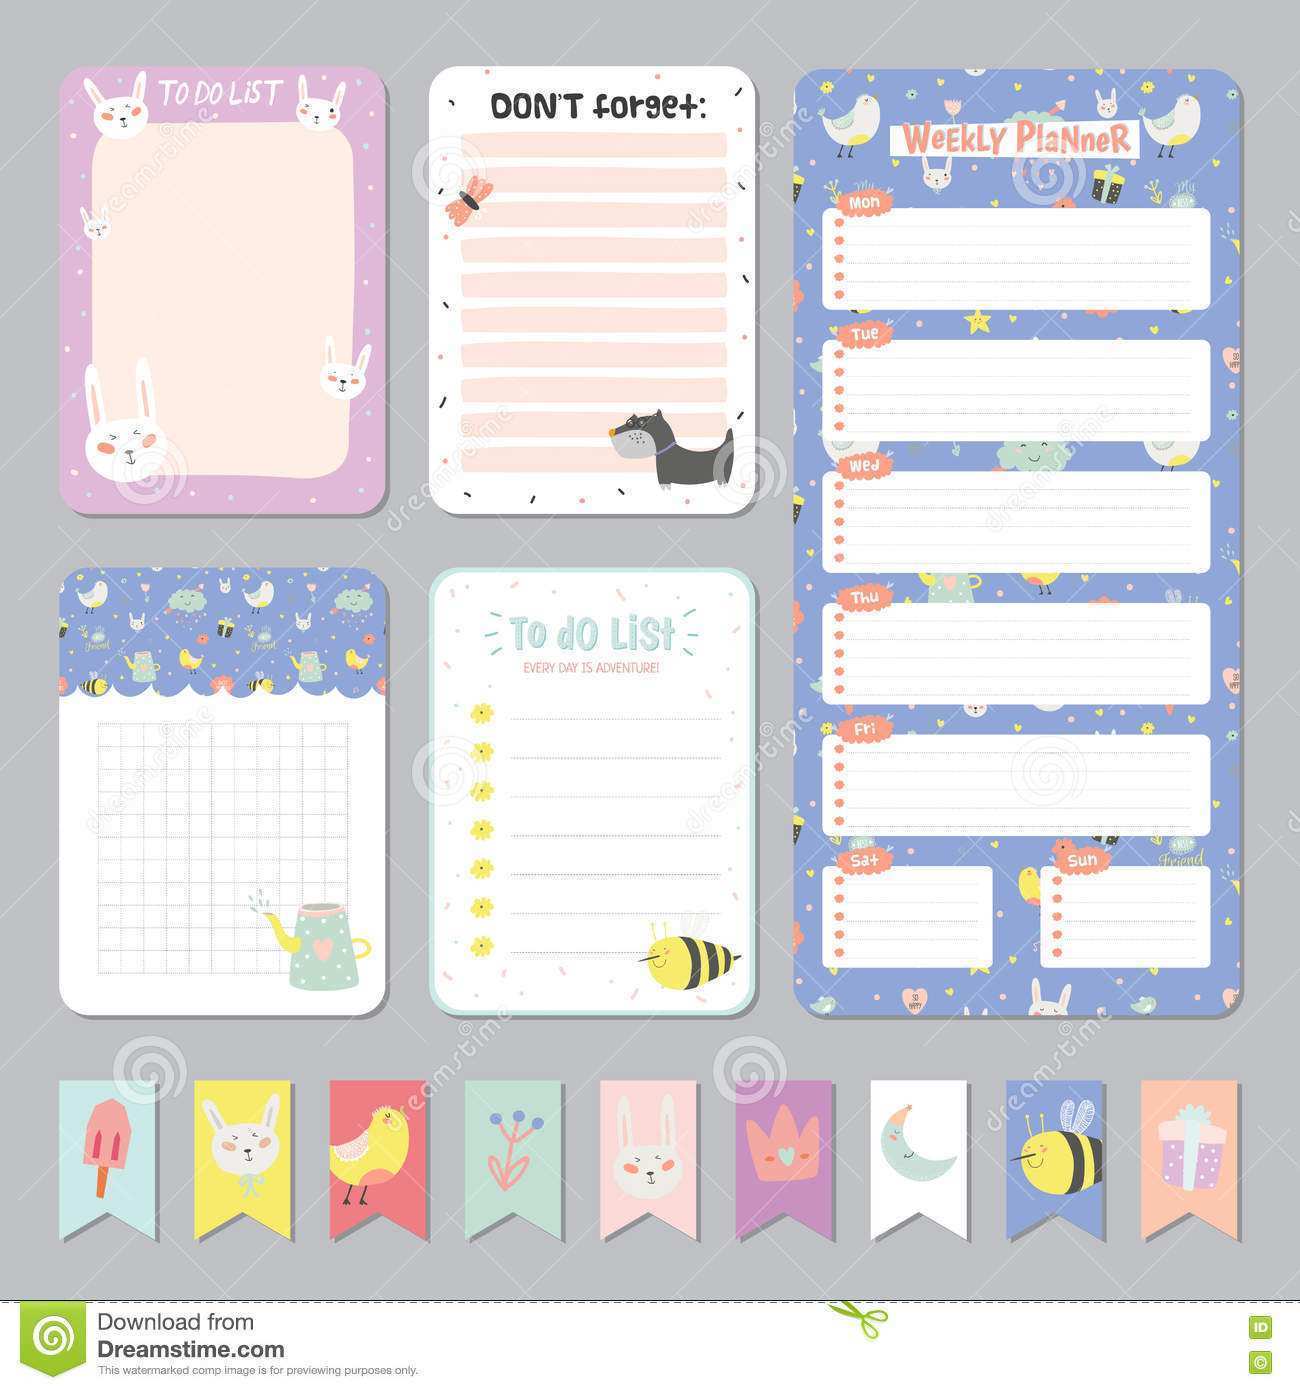 70 Visiting Daily Agenda Template Vector PSD File by Daily Agenda Template Vector